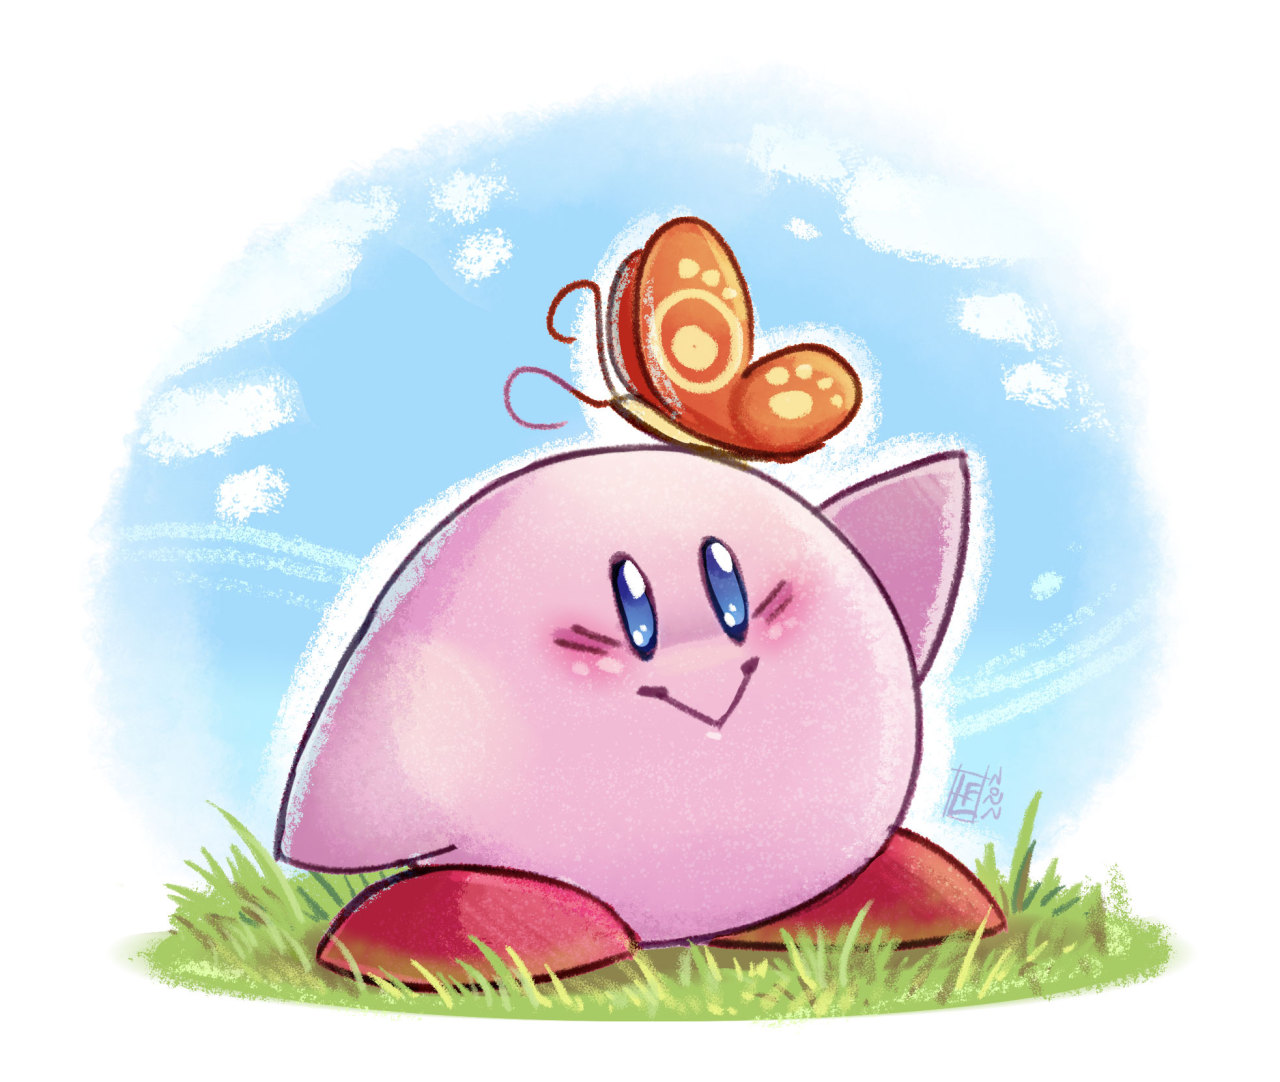 It’s the round poyo boy. He’s here to say hi.He hopes that youre having a nice day.Kirby (c) Nintendo and Hal Laboratory
Doodle made by me. #kirby #kirby and the forgotten land  #kirby 30th anniversary #doodle#doodles#digital artwork#sketchbook#sketch#nintendo#fanart#digital art #kirby star allies